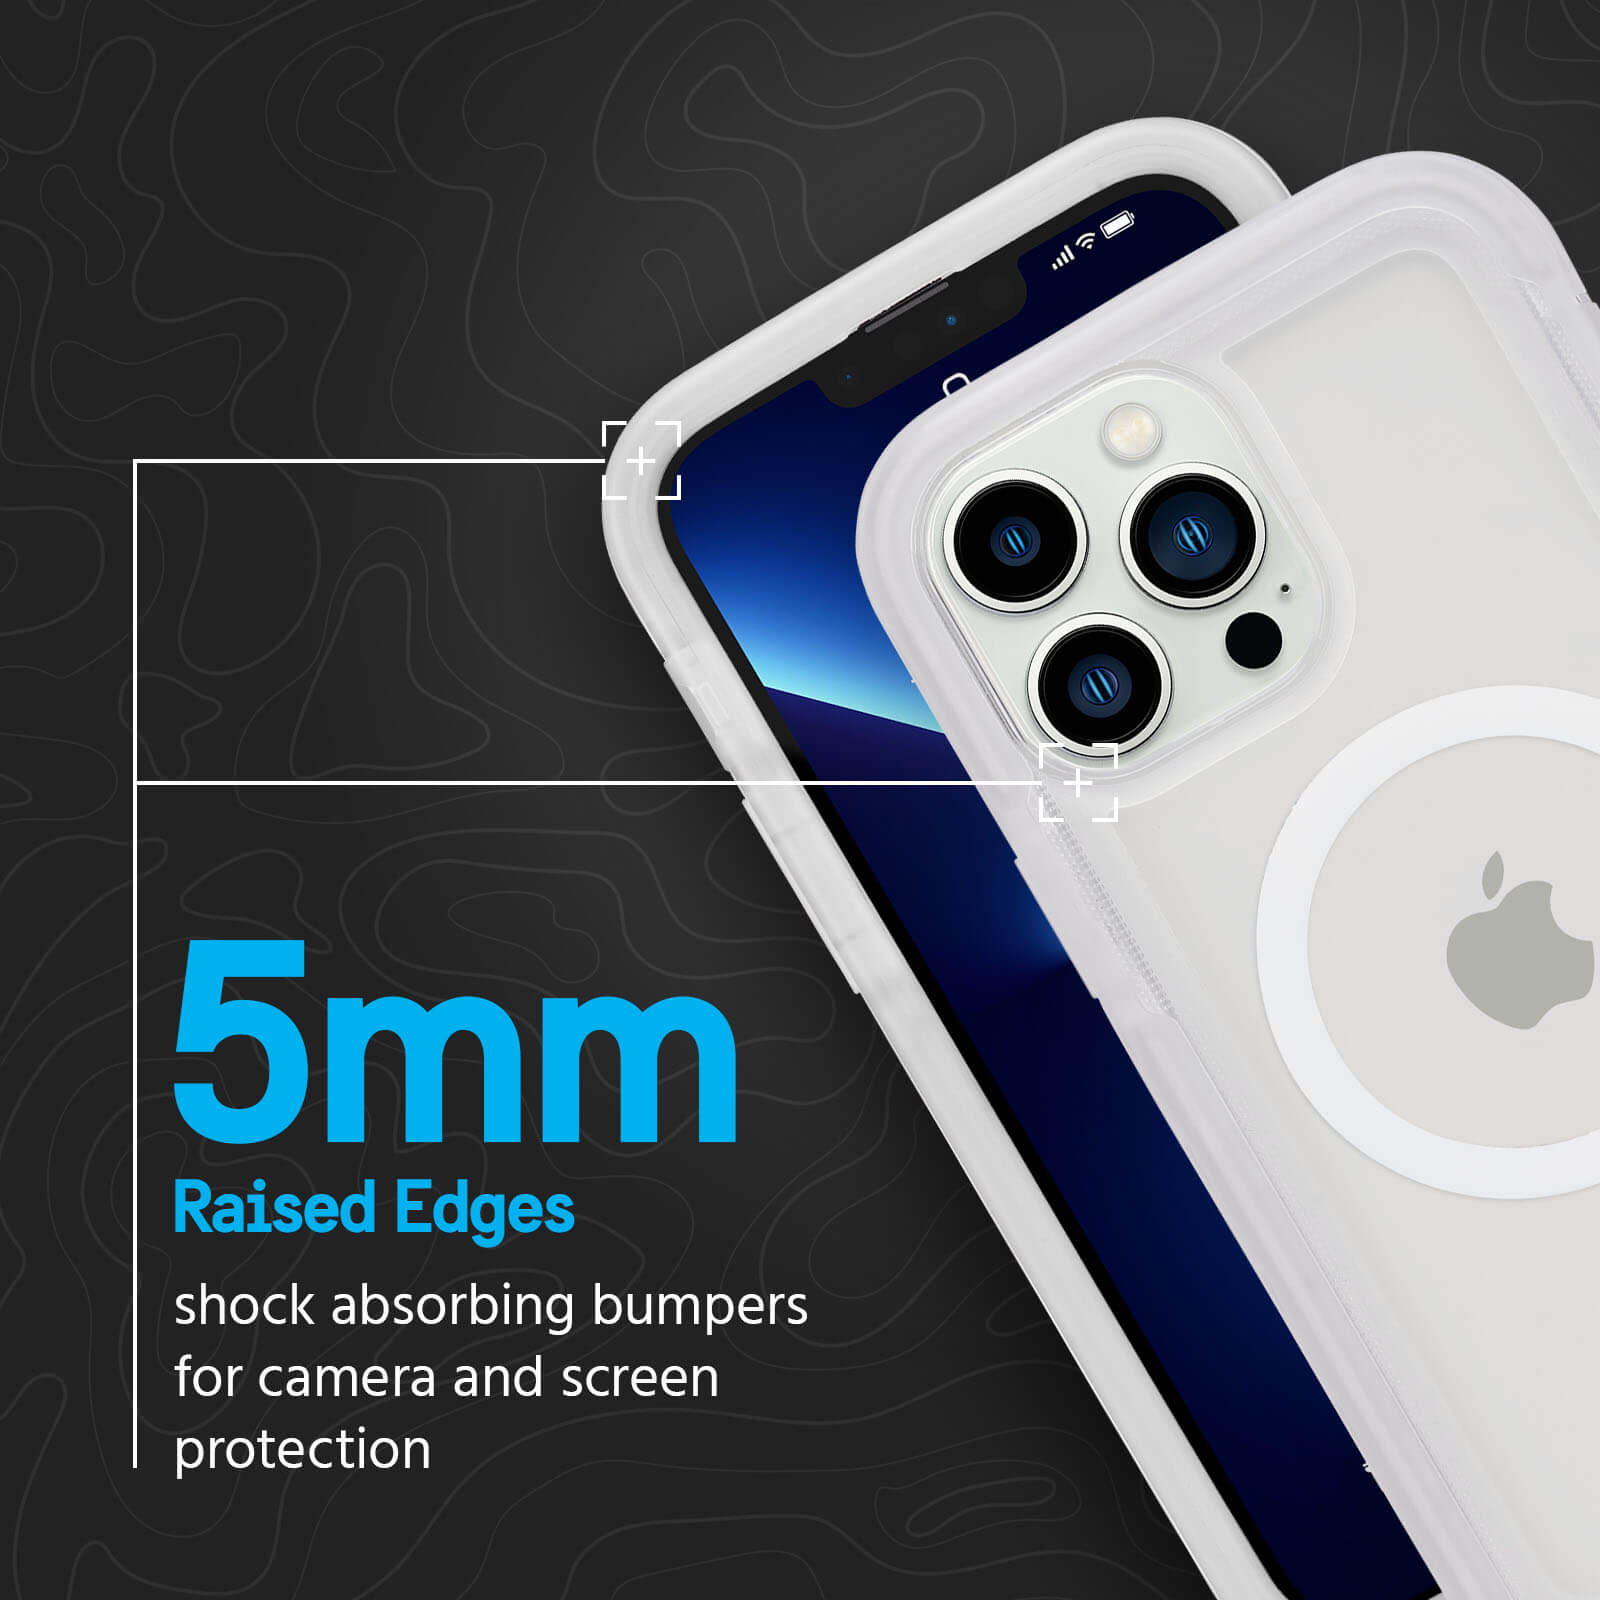 5mm Raised Edges shock absorbing bumpers for camera and screen protection. color::Clear